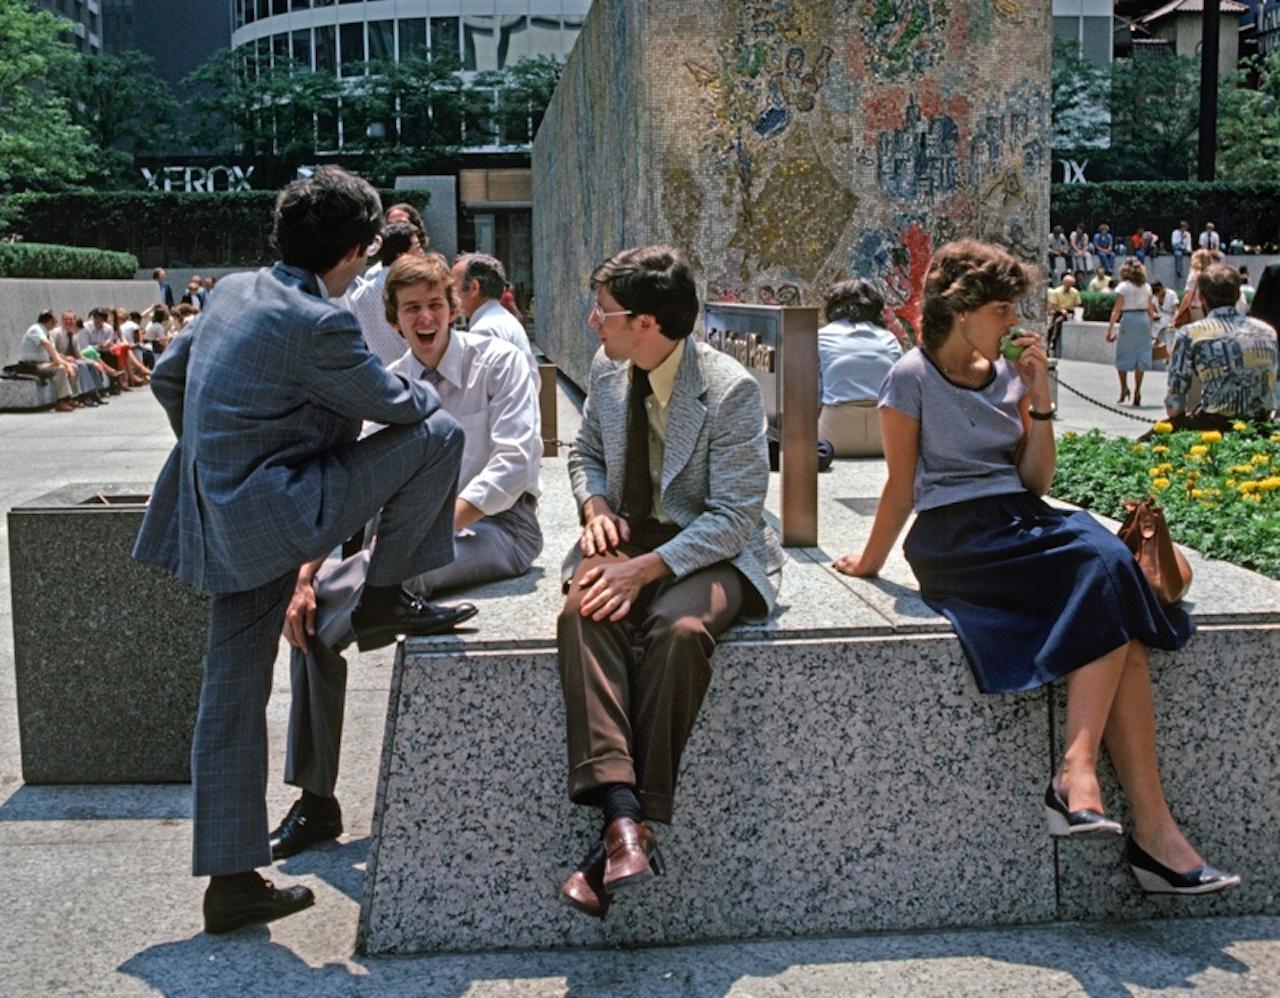 Lunch Hour by Alain Le Garsmeur
A lunchtime crowd relaxes in front of Marc Chagall’s Mosaic ‘Four Seasons’ in Chase Tower Plaza, Chicago, Illinois, USA, 1979. 

Paper size 20 x 24 inches / 50 x 60 cm
Printed in 2022 - produced from the original